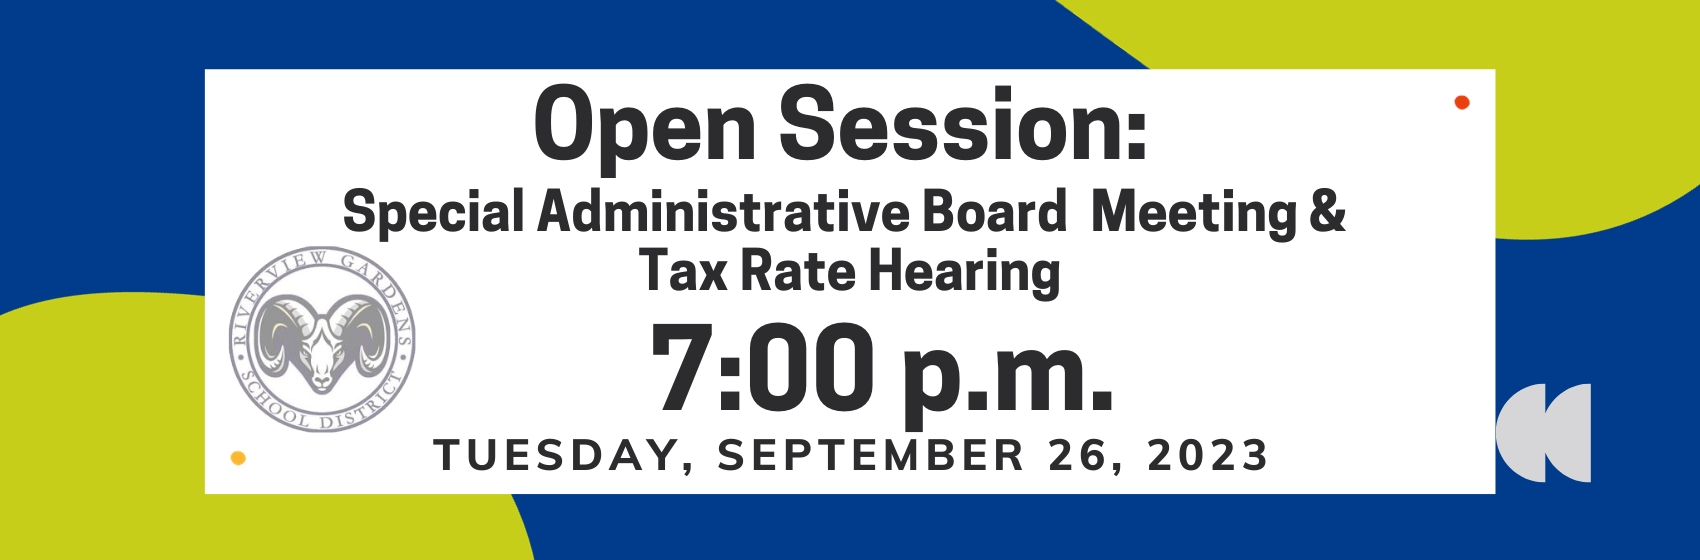 Tax Rate Hearing